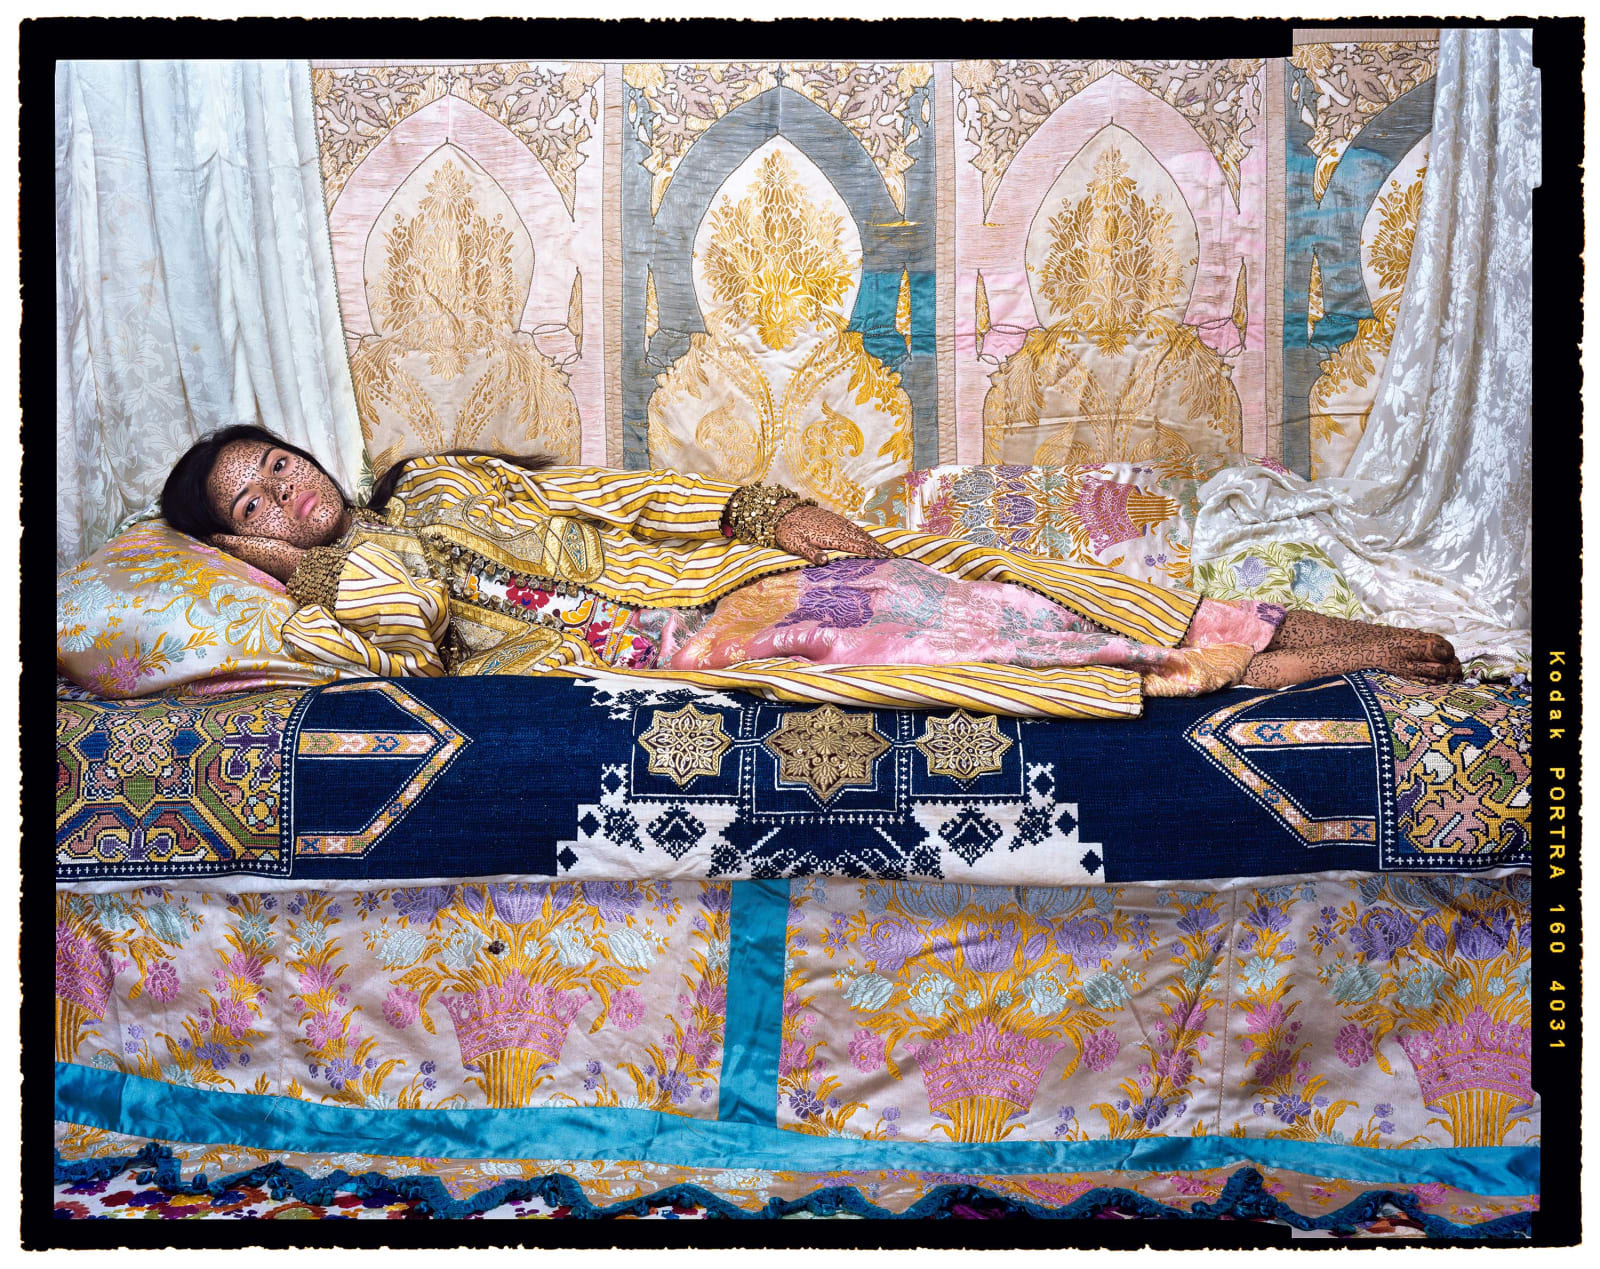 Lalla Essaydi, Harem Revisited #33, 2012, Reclining woman in brightly colored Moroccan silk fabric